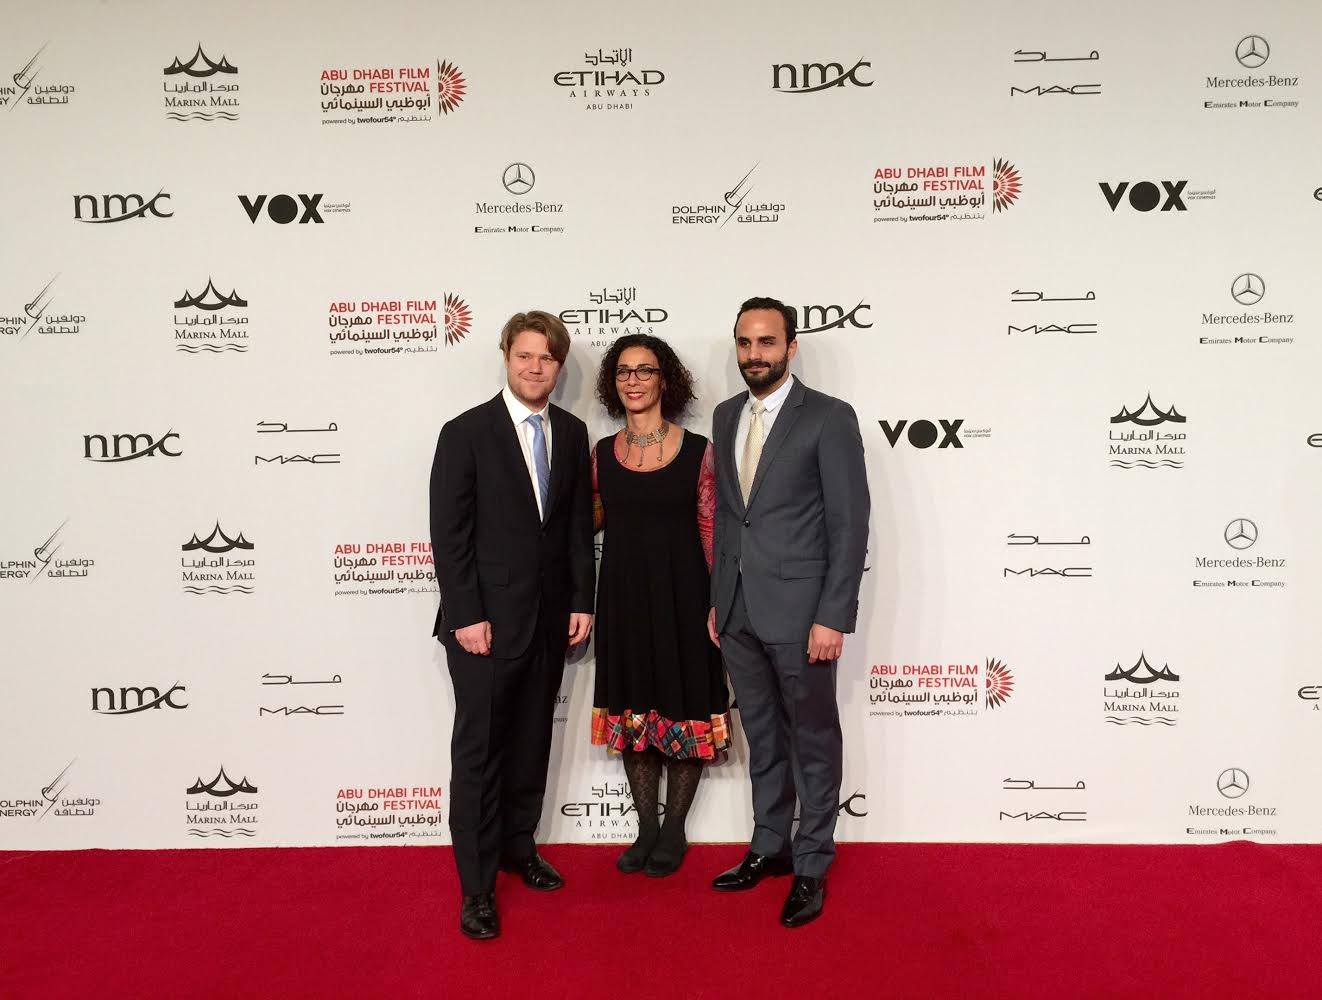 At the Abu Dhabi Film Festival 2014, with Theeb producers, Rupert Lloyd and Bassel Ghandour.